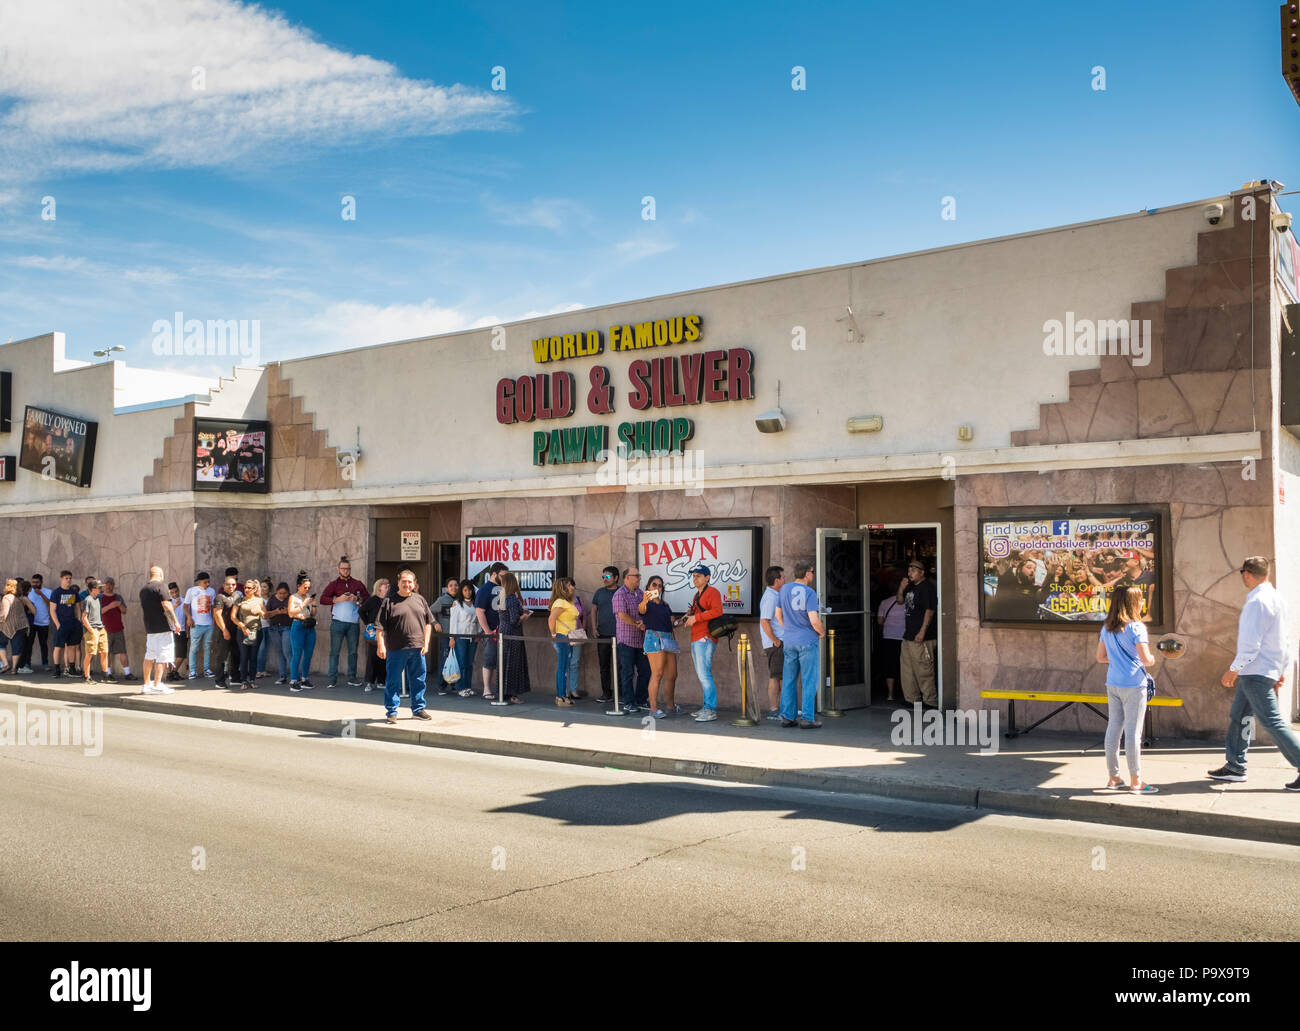 The Gold and Silver Pawn Shop of TV's Pawn Stars fame in Las Vegas, Nevada,  USA Stock Photo - Alamy